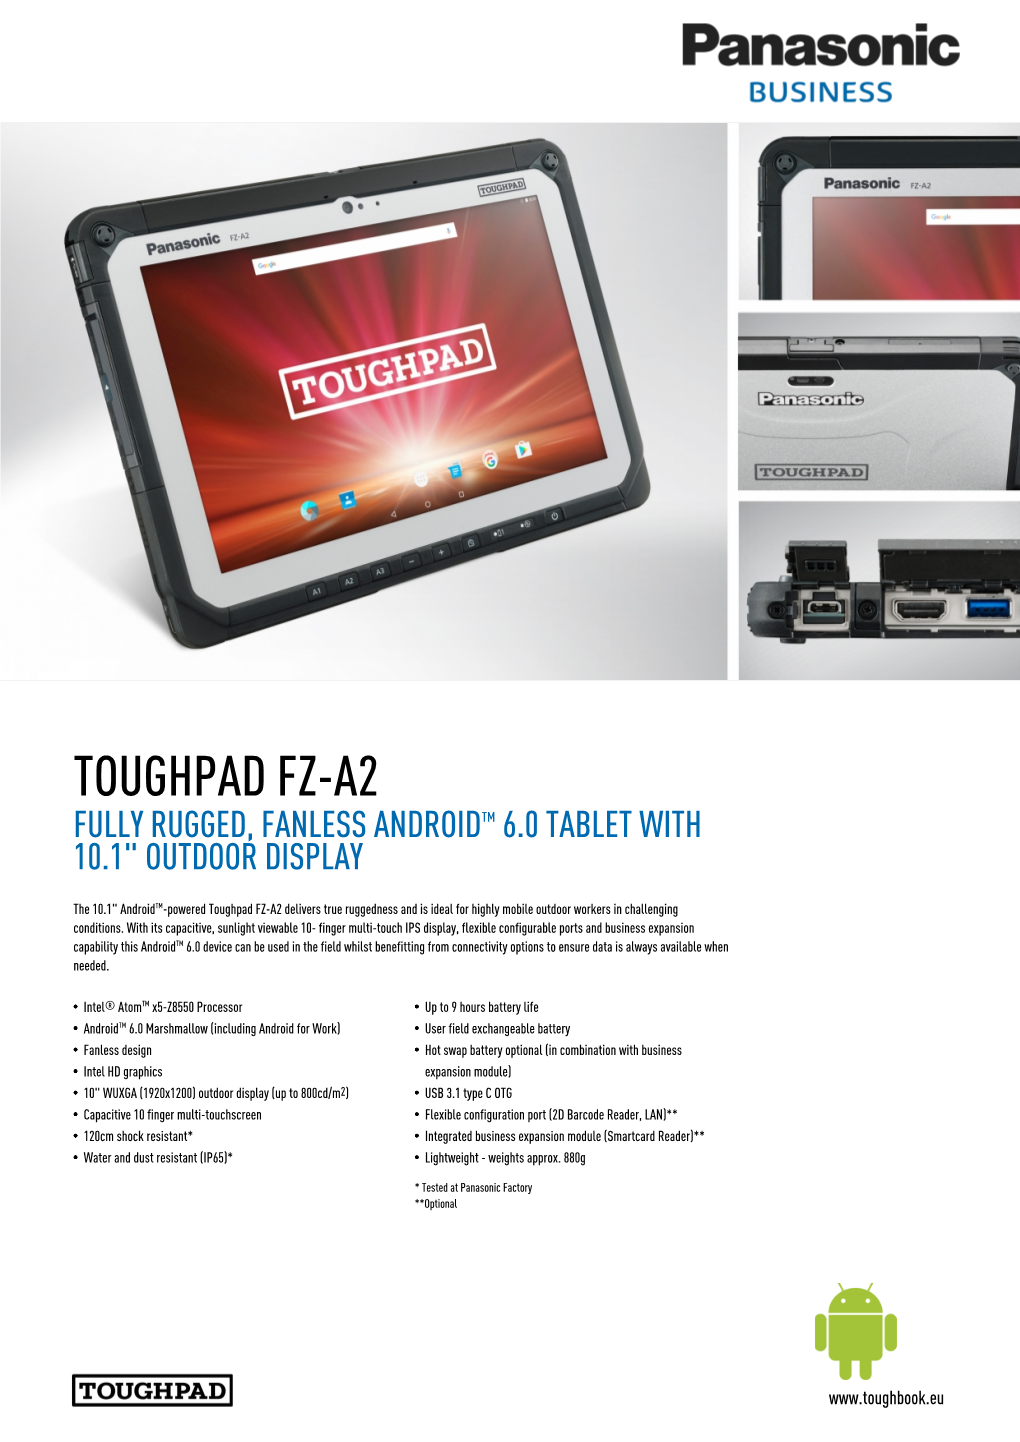 Panasonic Toughpad FZ-A2 Helps to Drive Efficiency and Productivity in Ways That Were Never Previously Possible